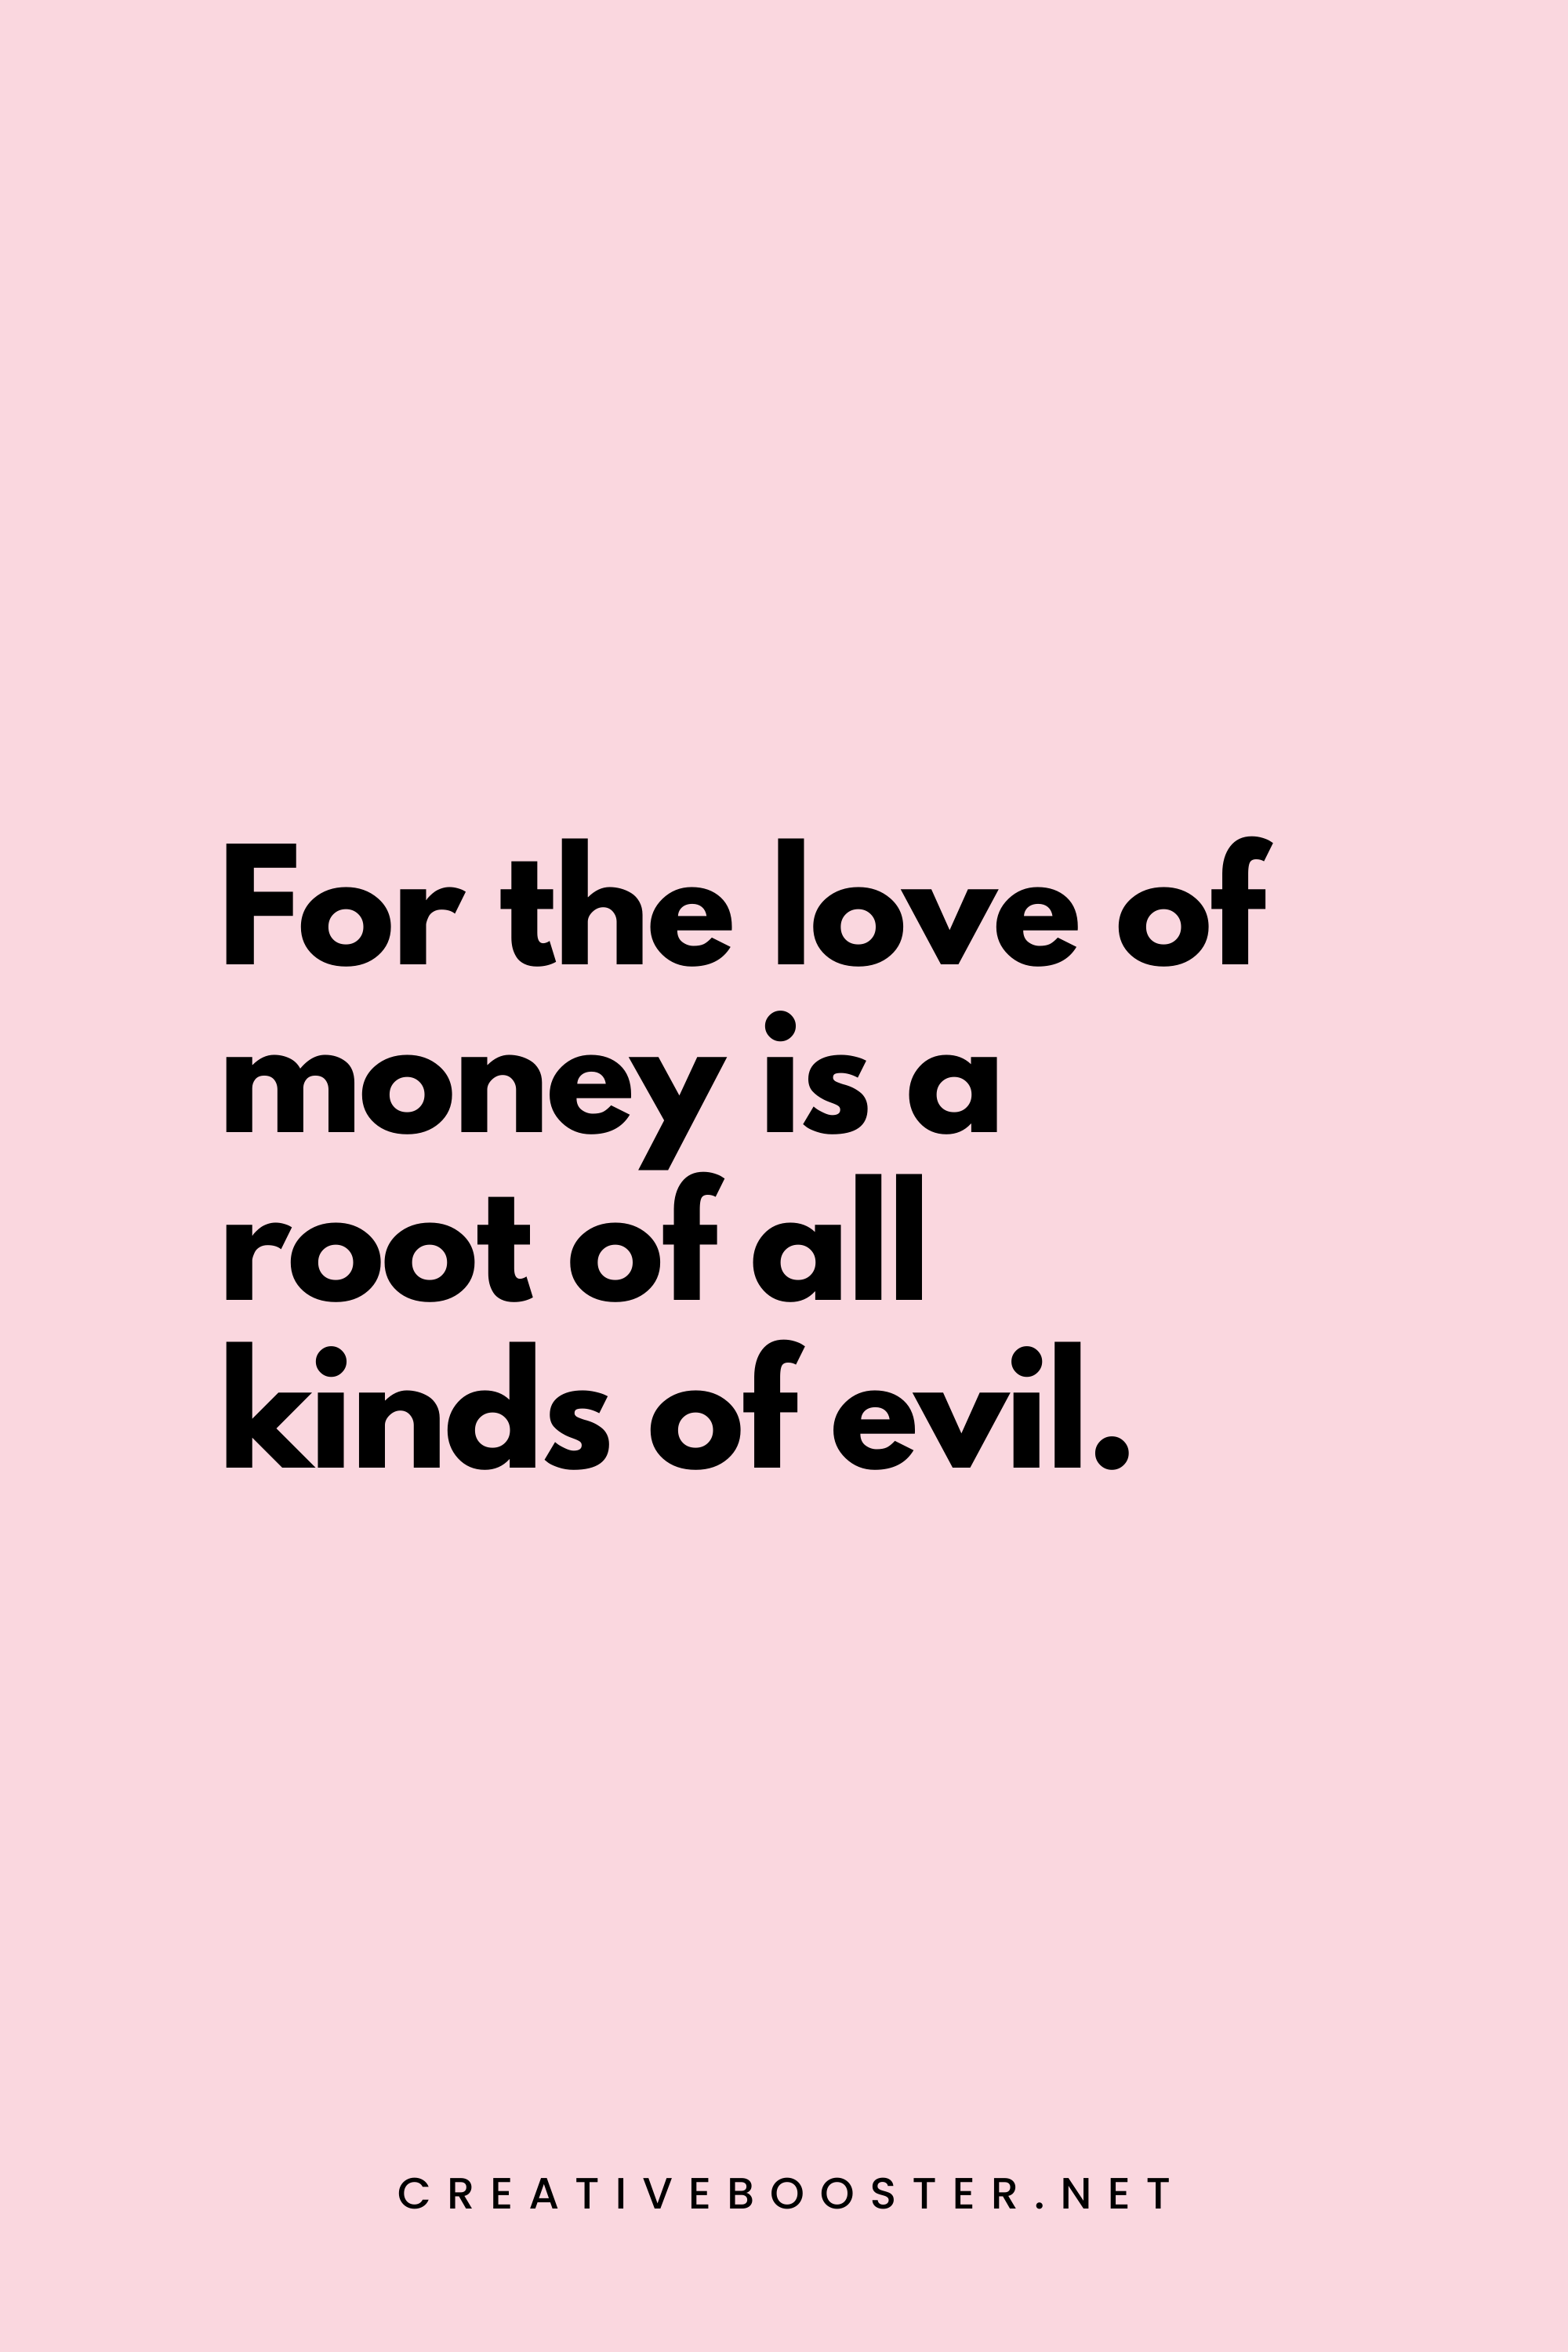 48. For the love of money is a root of all kinds of evil. - 1 Timothy 6:10 - 5.